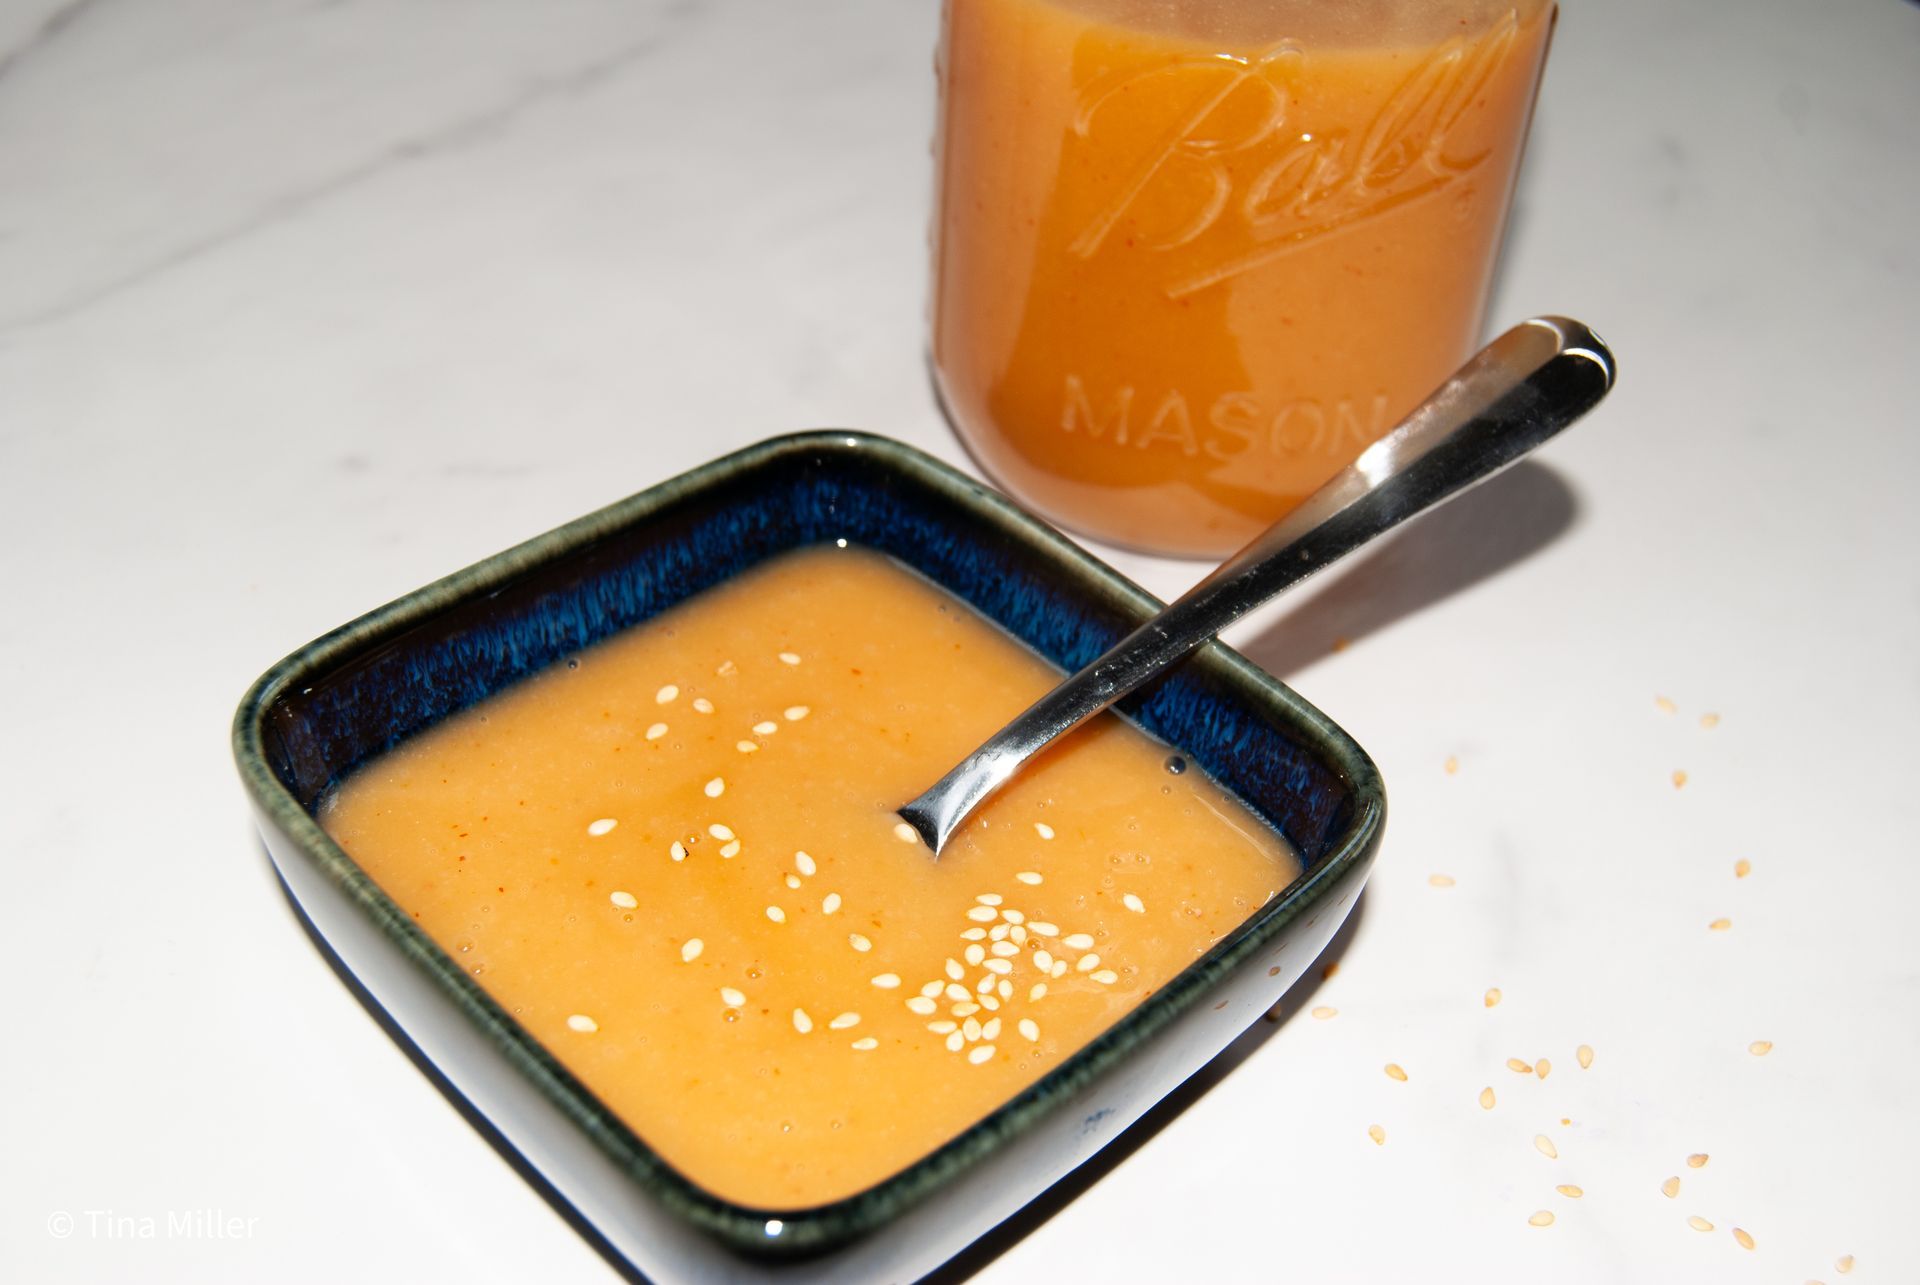 Creamy Asian inspired miso dressing in a blue ceramic bowl with a spoon for dipping, garnished with sesame seeds. A jar of dressing in the background.